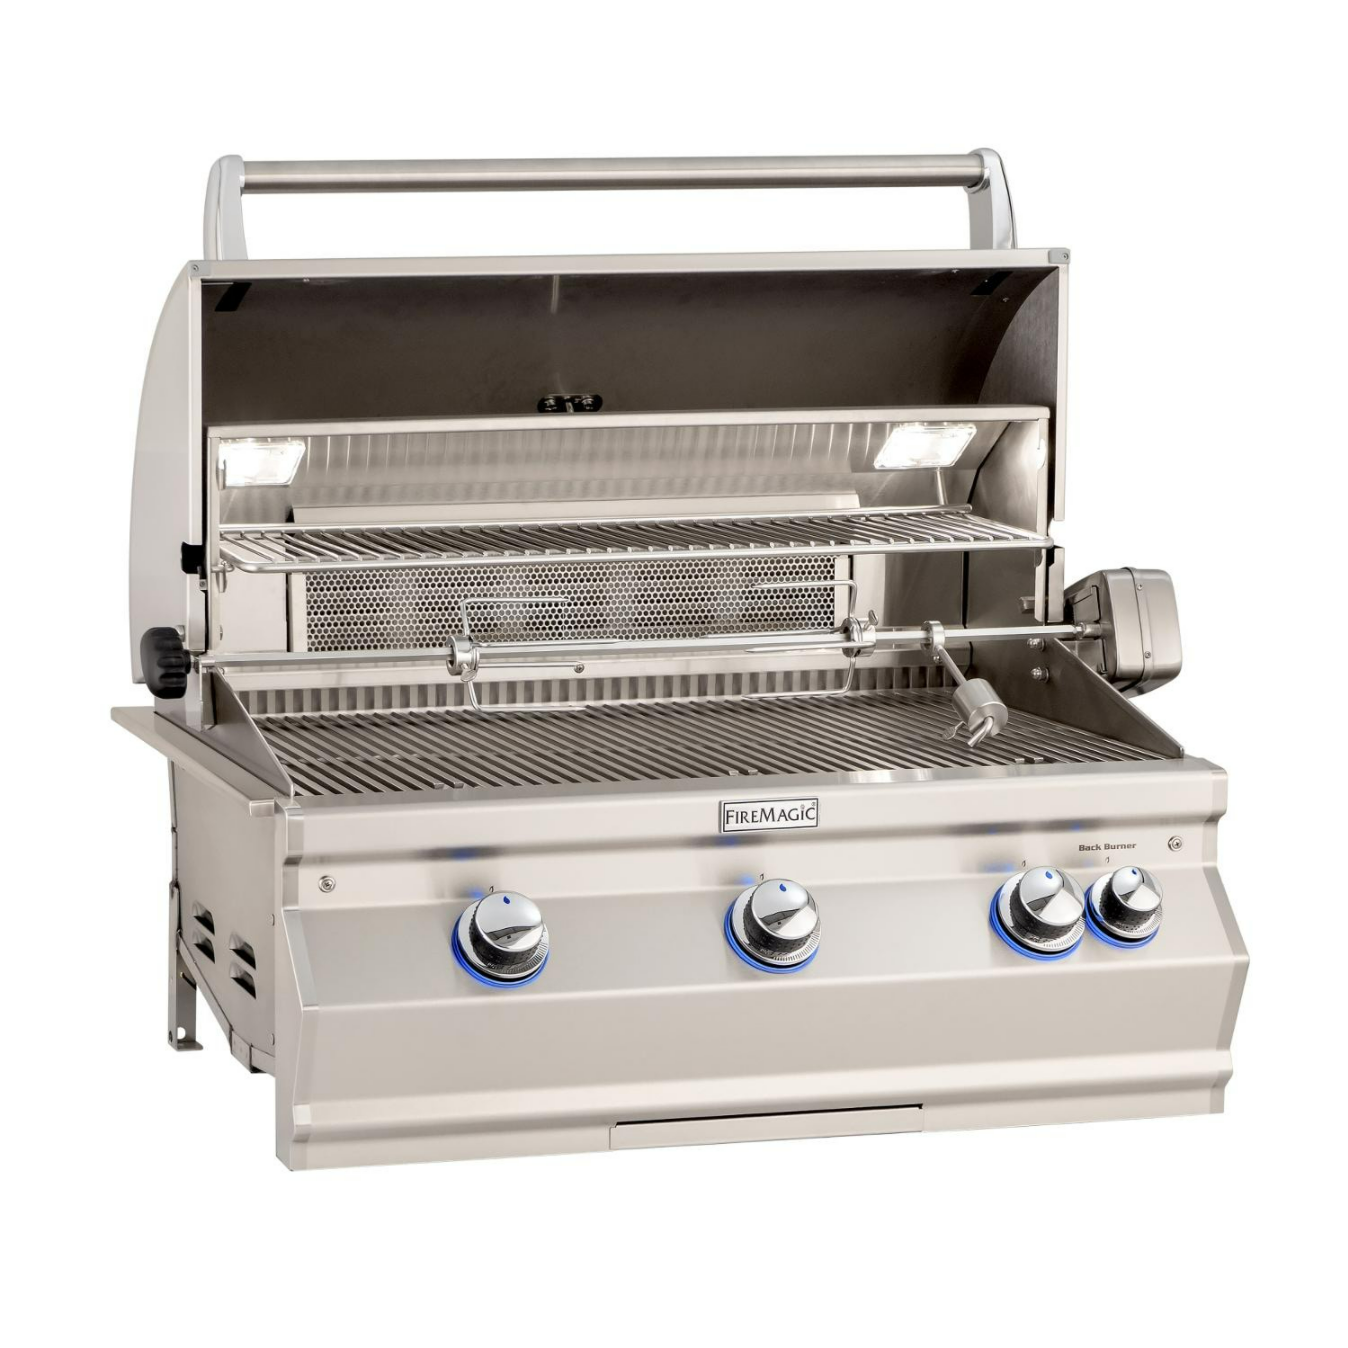 Fire Magic Aurora A790i 36" Built-In Grill Without Rotisserie w/ Window